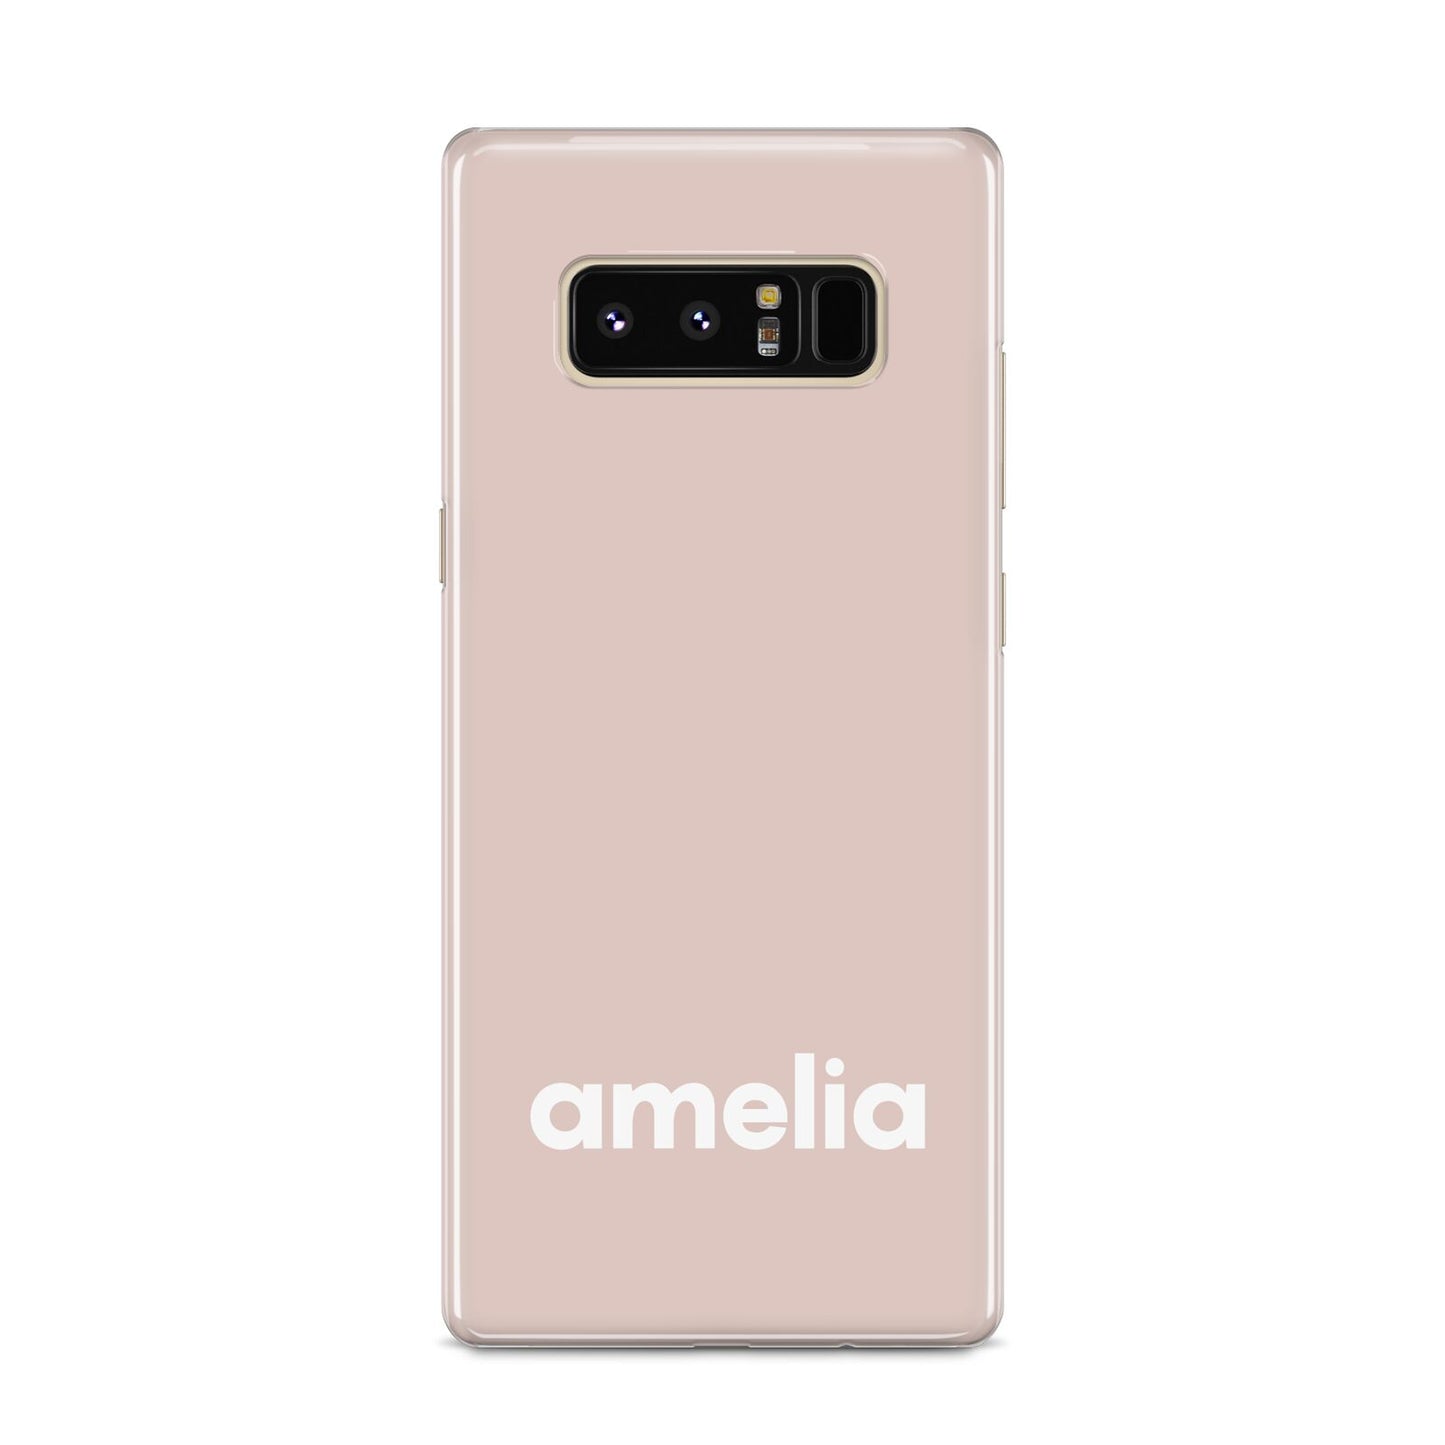 Simple Blush Pink with Name Samsung Galaxy S8 Case